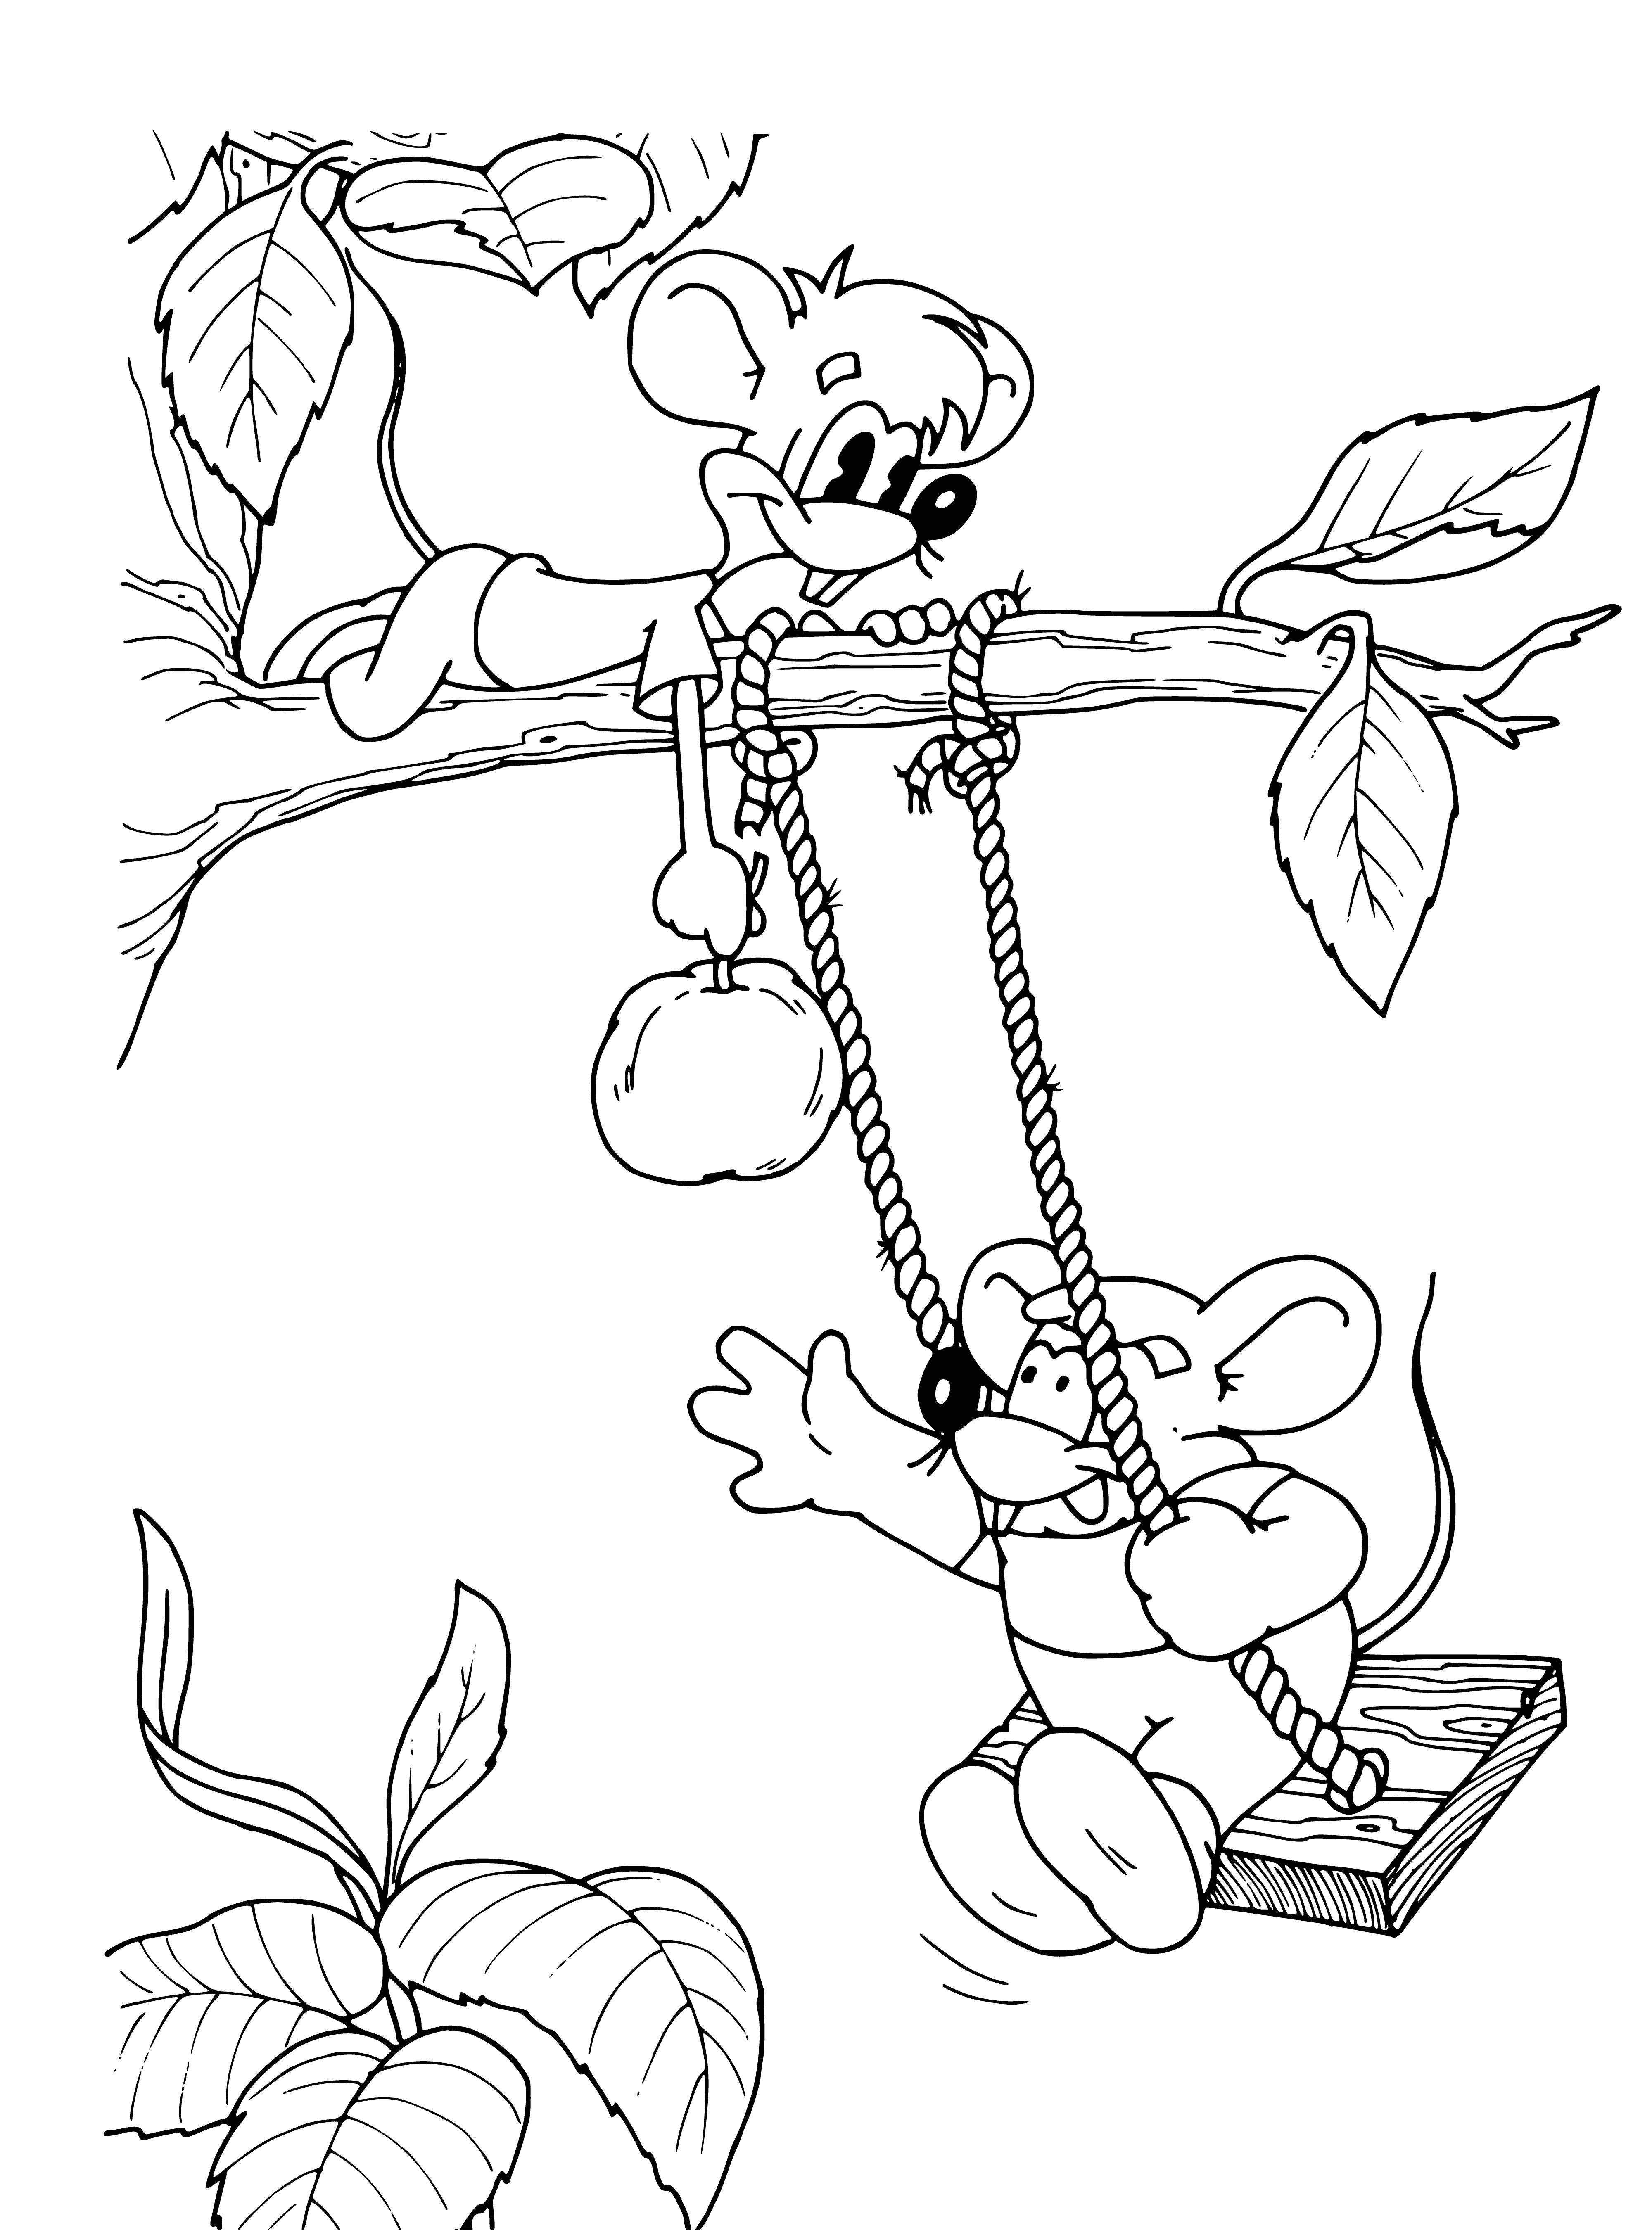 coloring page: A thin black cat stands on a large yellow swing in the top left corner of the coloring page, paw extended in front. Set against a green leafy background.